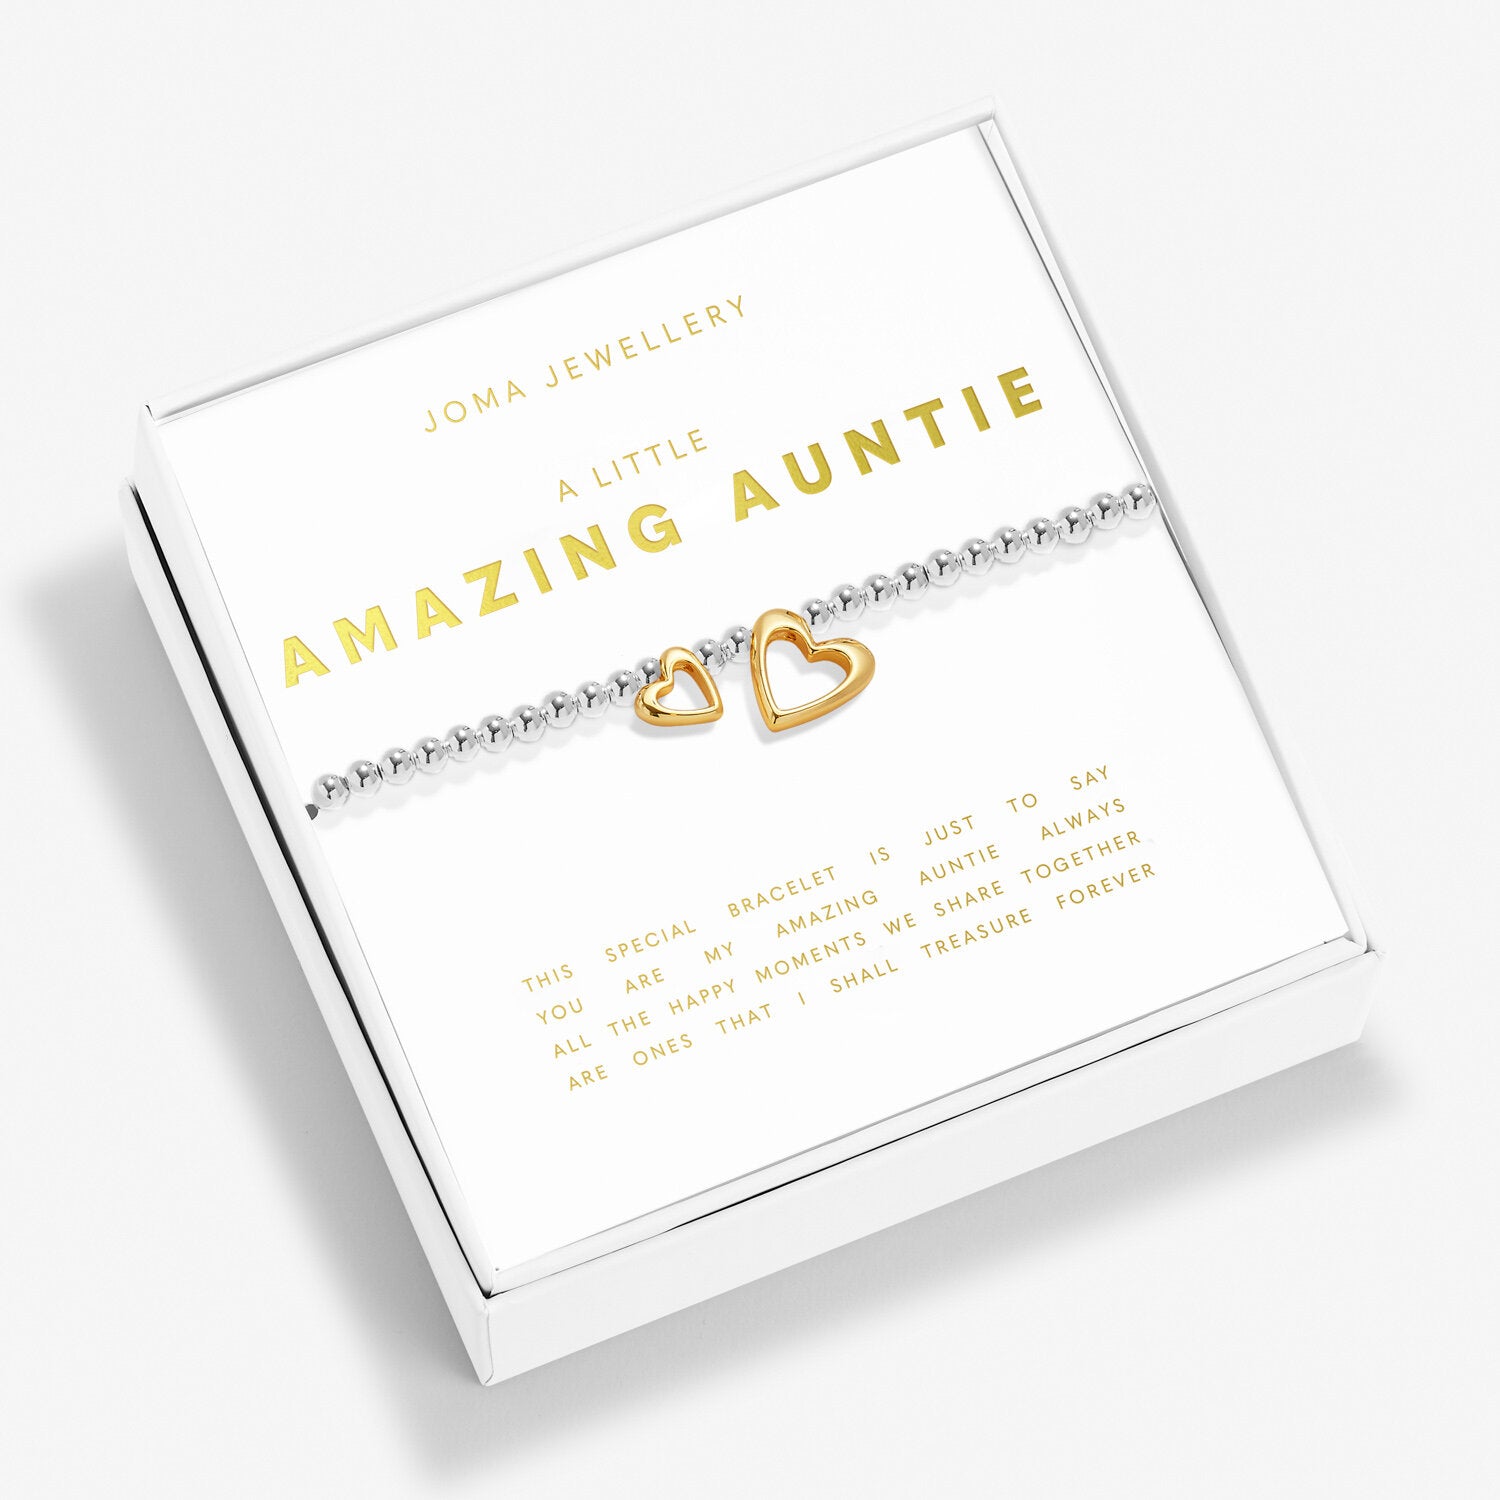 Joma Jewellery Boxed A Little 'Amazing Auntie' Bracelet In Silver And Gold Plating |More Than Just A Gift